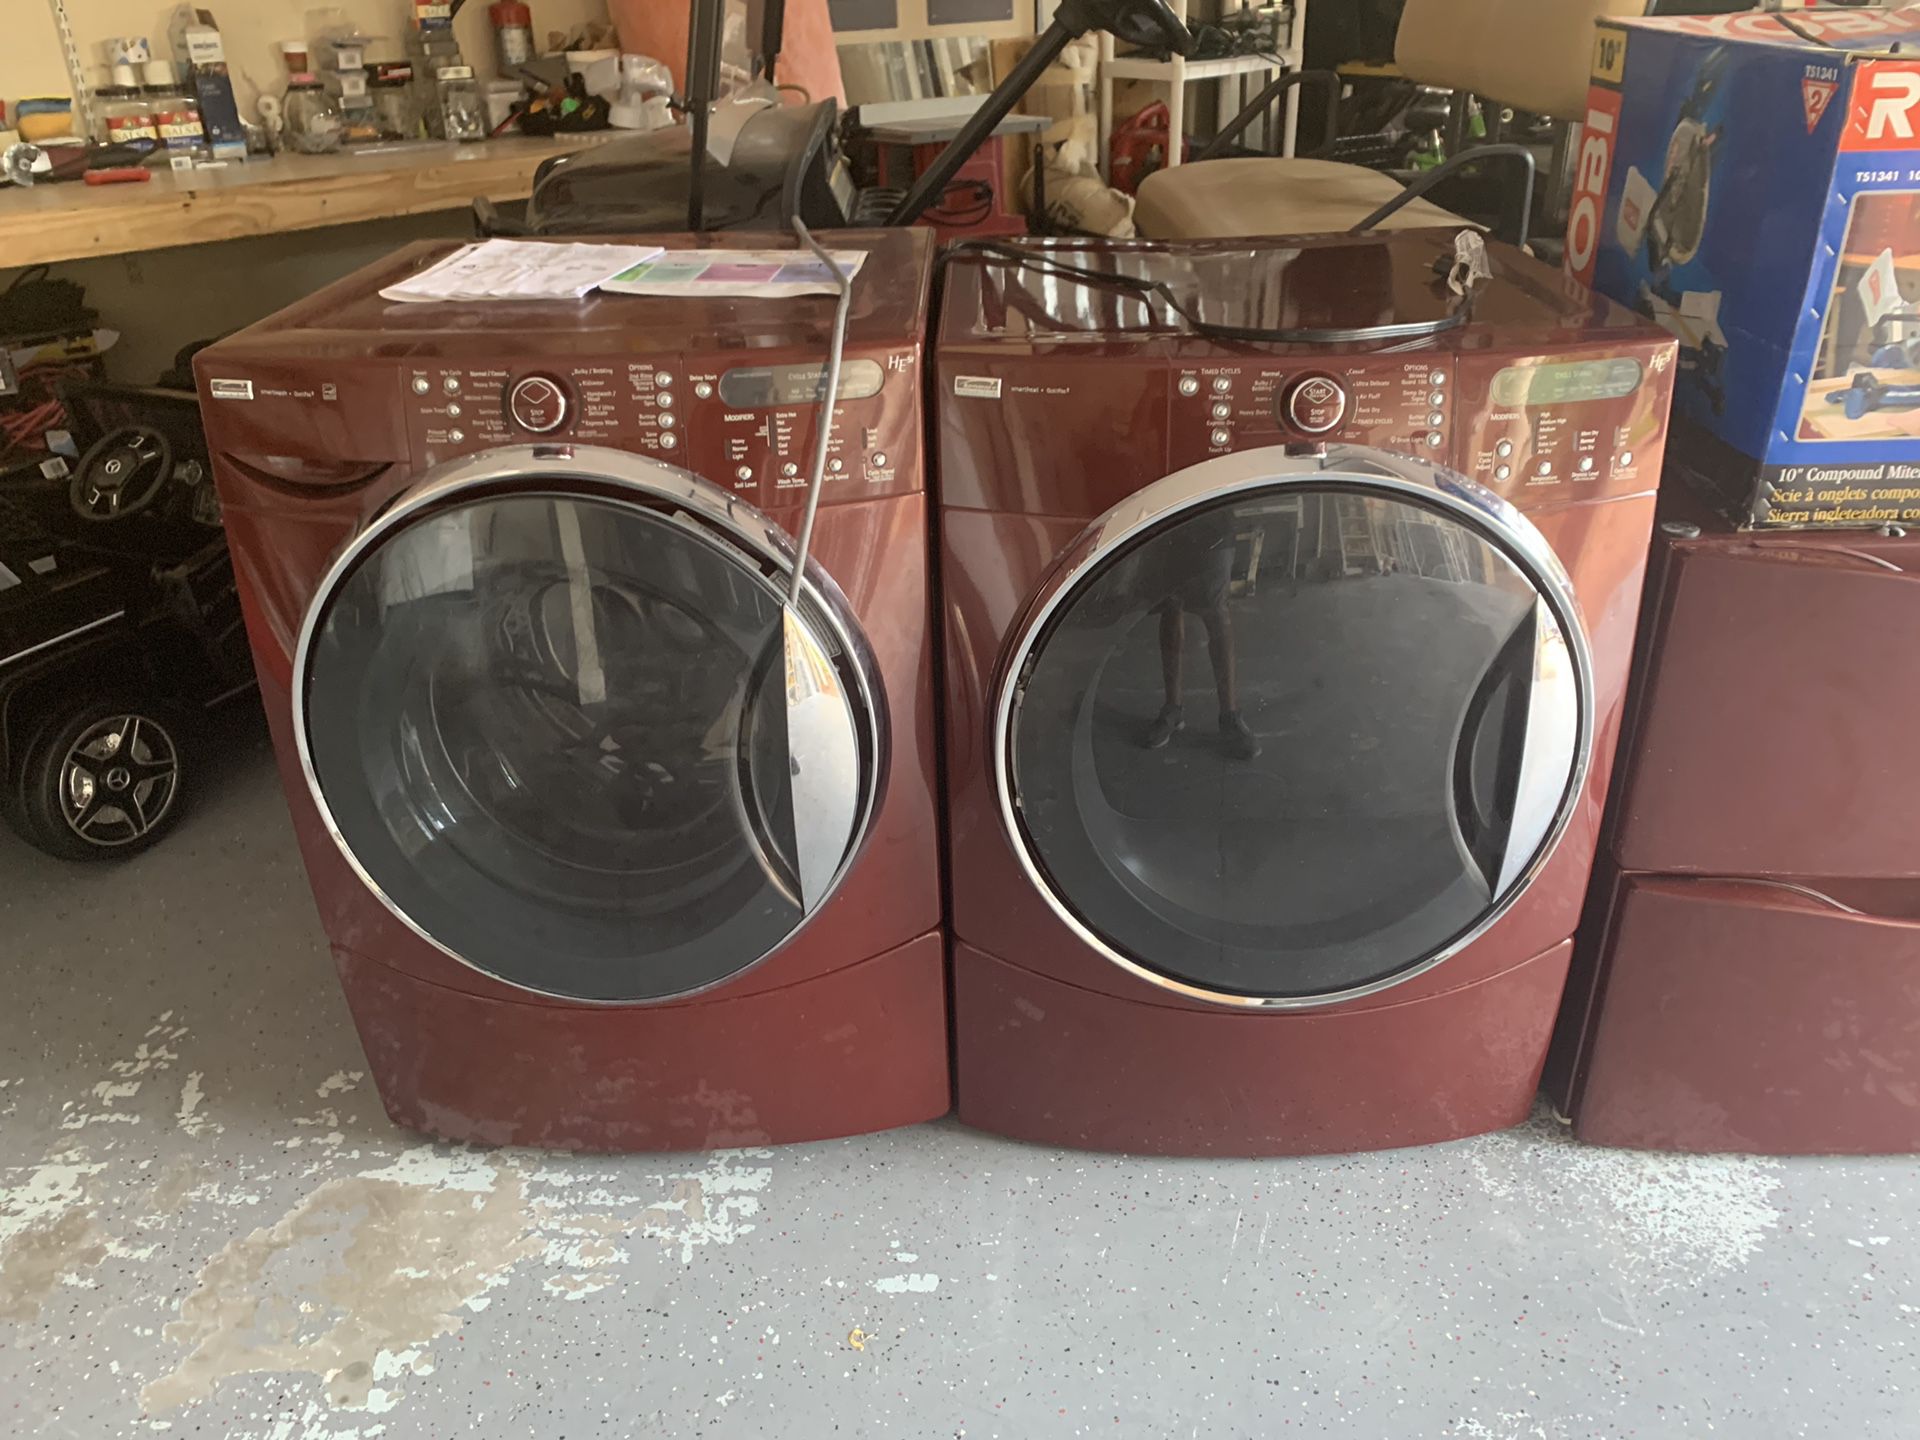 Kenmore whaser and dryer combo in great conditions everything works perfectly fine but the washer moves a lot when is spinning but works great it